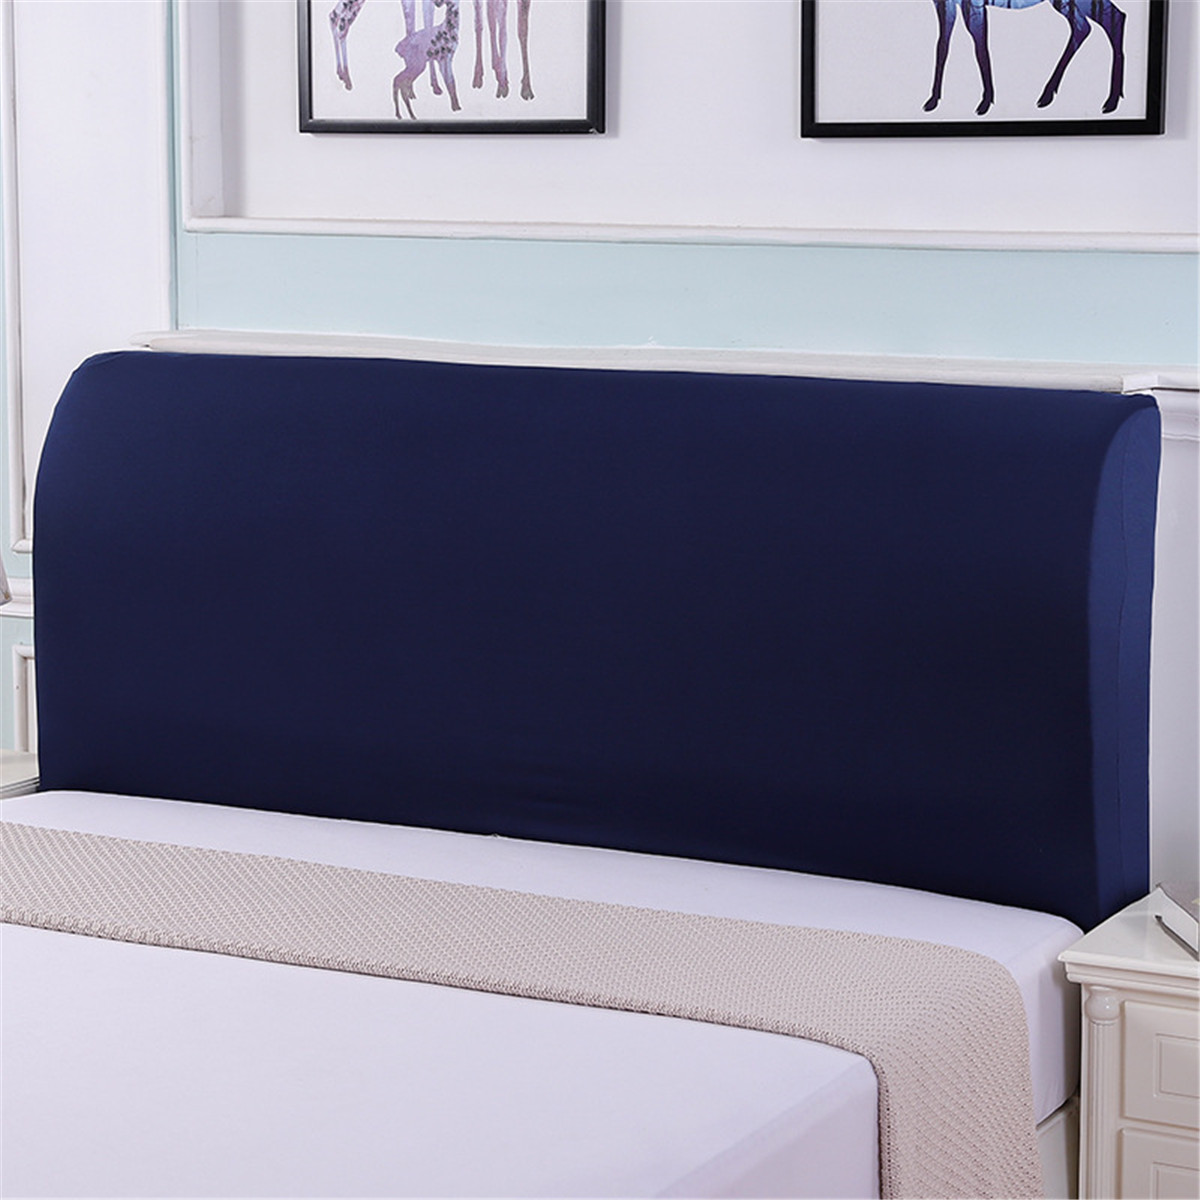 200CM-Polyester-Elastic-Bed-Headboard-Cover-Full-Dustproof-Protector-Slipcover-Bed-Protection-Dust-C-1698681-8